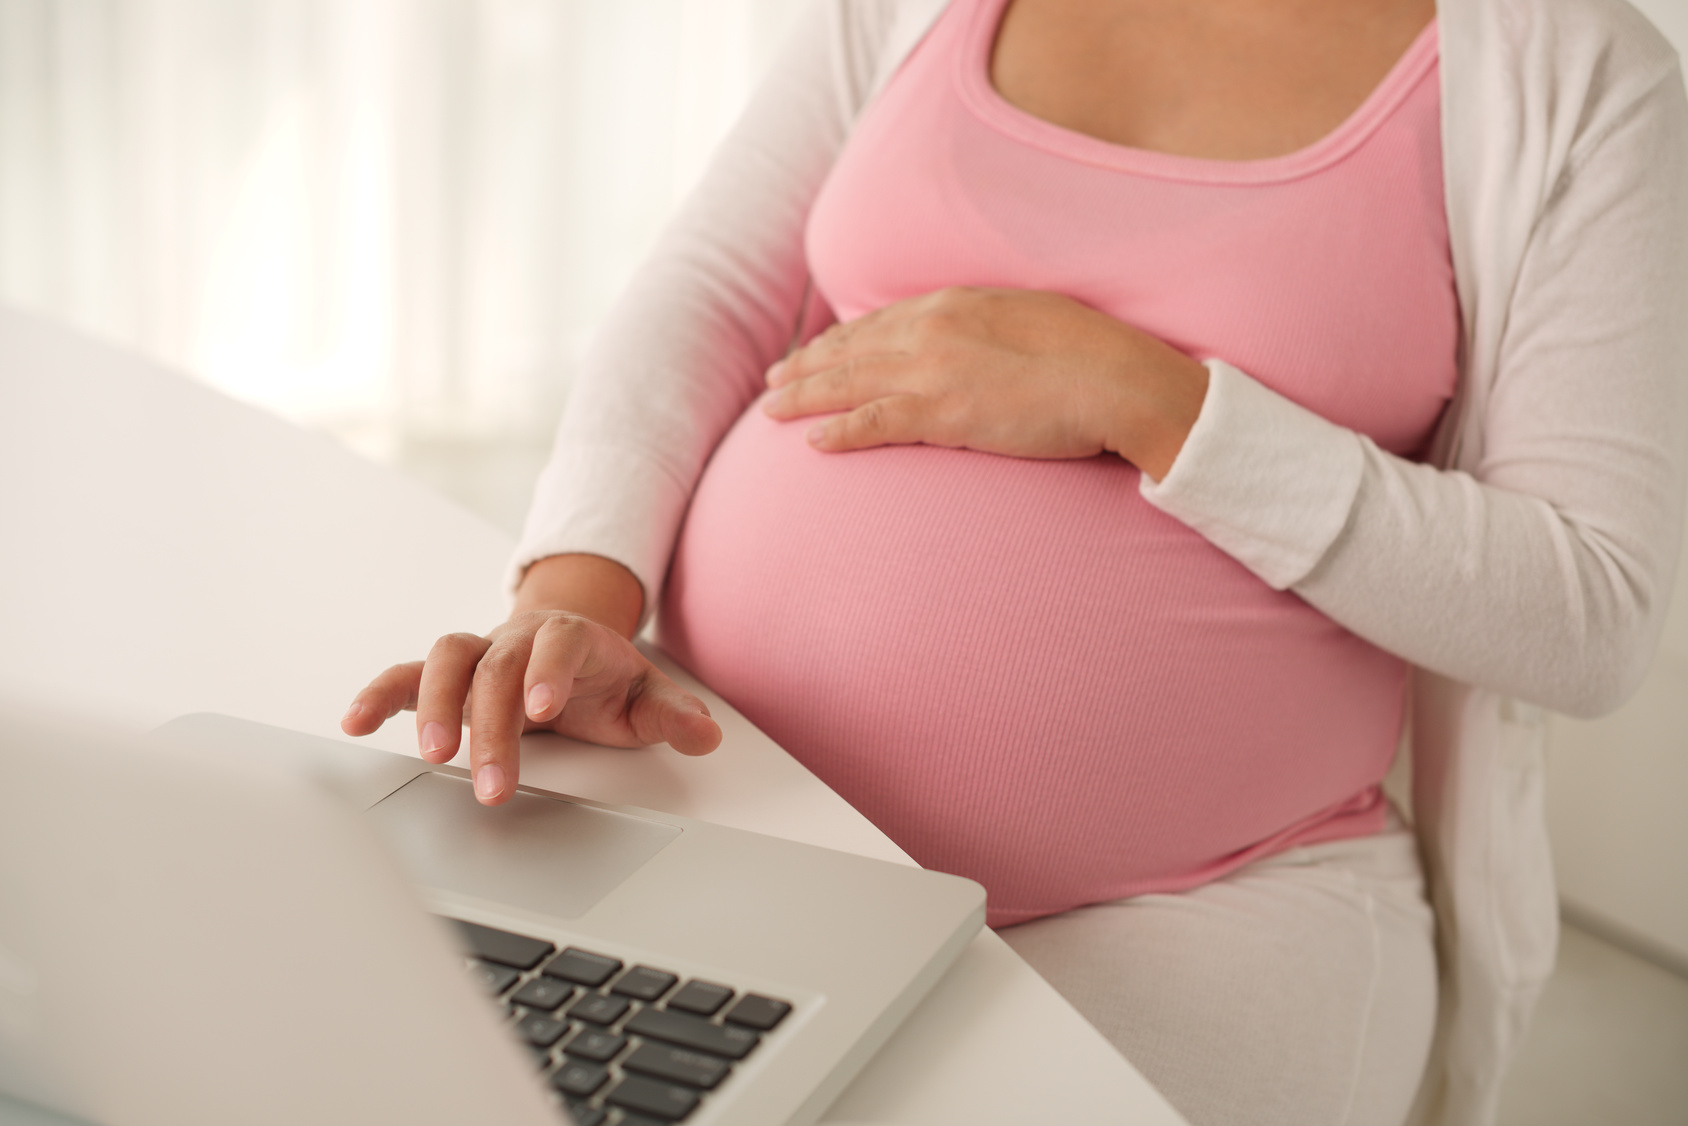 How can pregnancy effect your vision? 